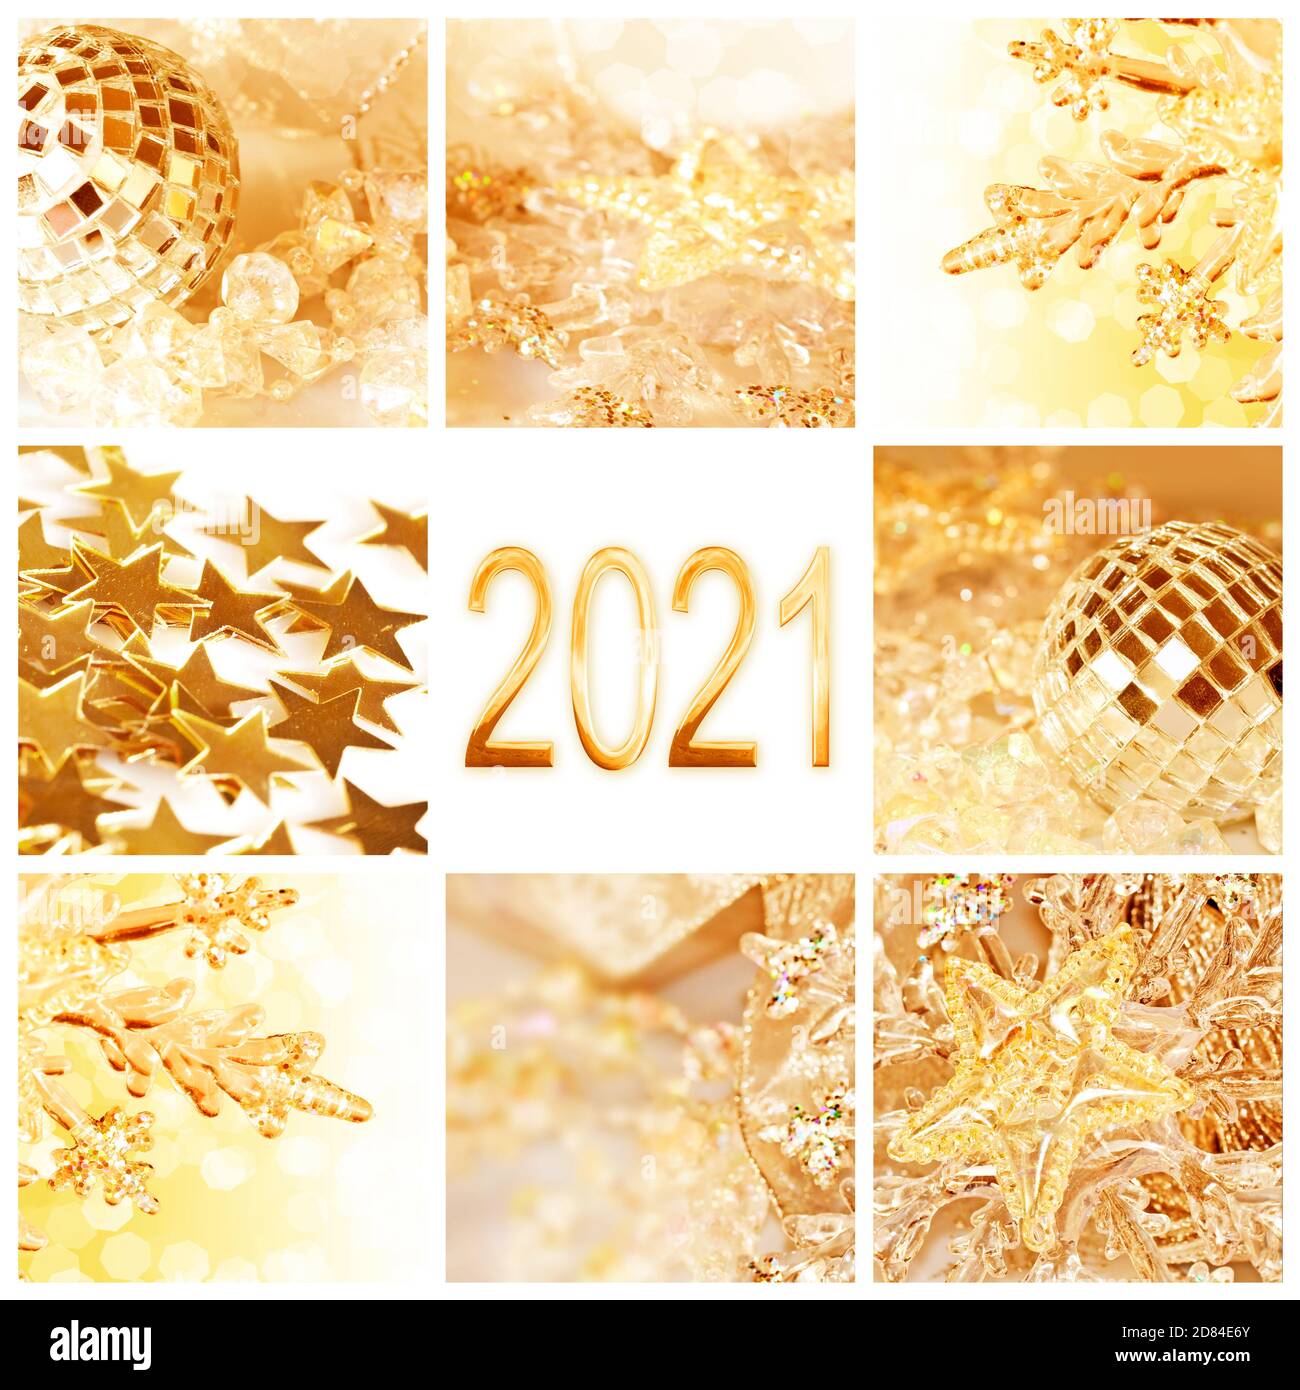 2021, golden christmas ornaments collage square new year and holiday greeting card Stock Photo